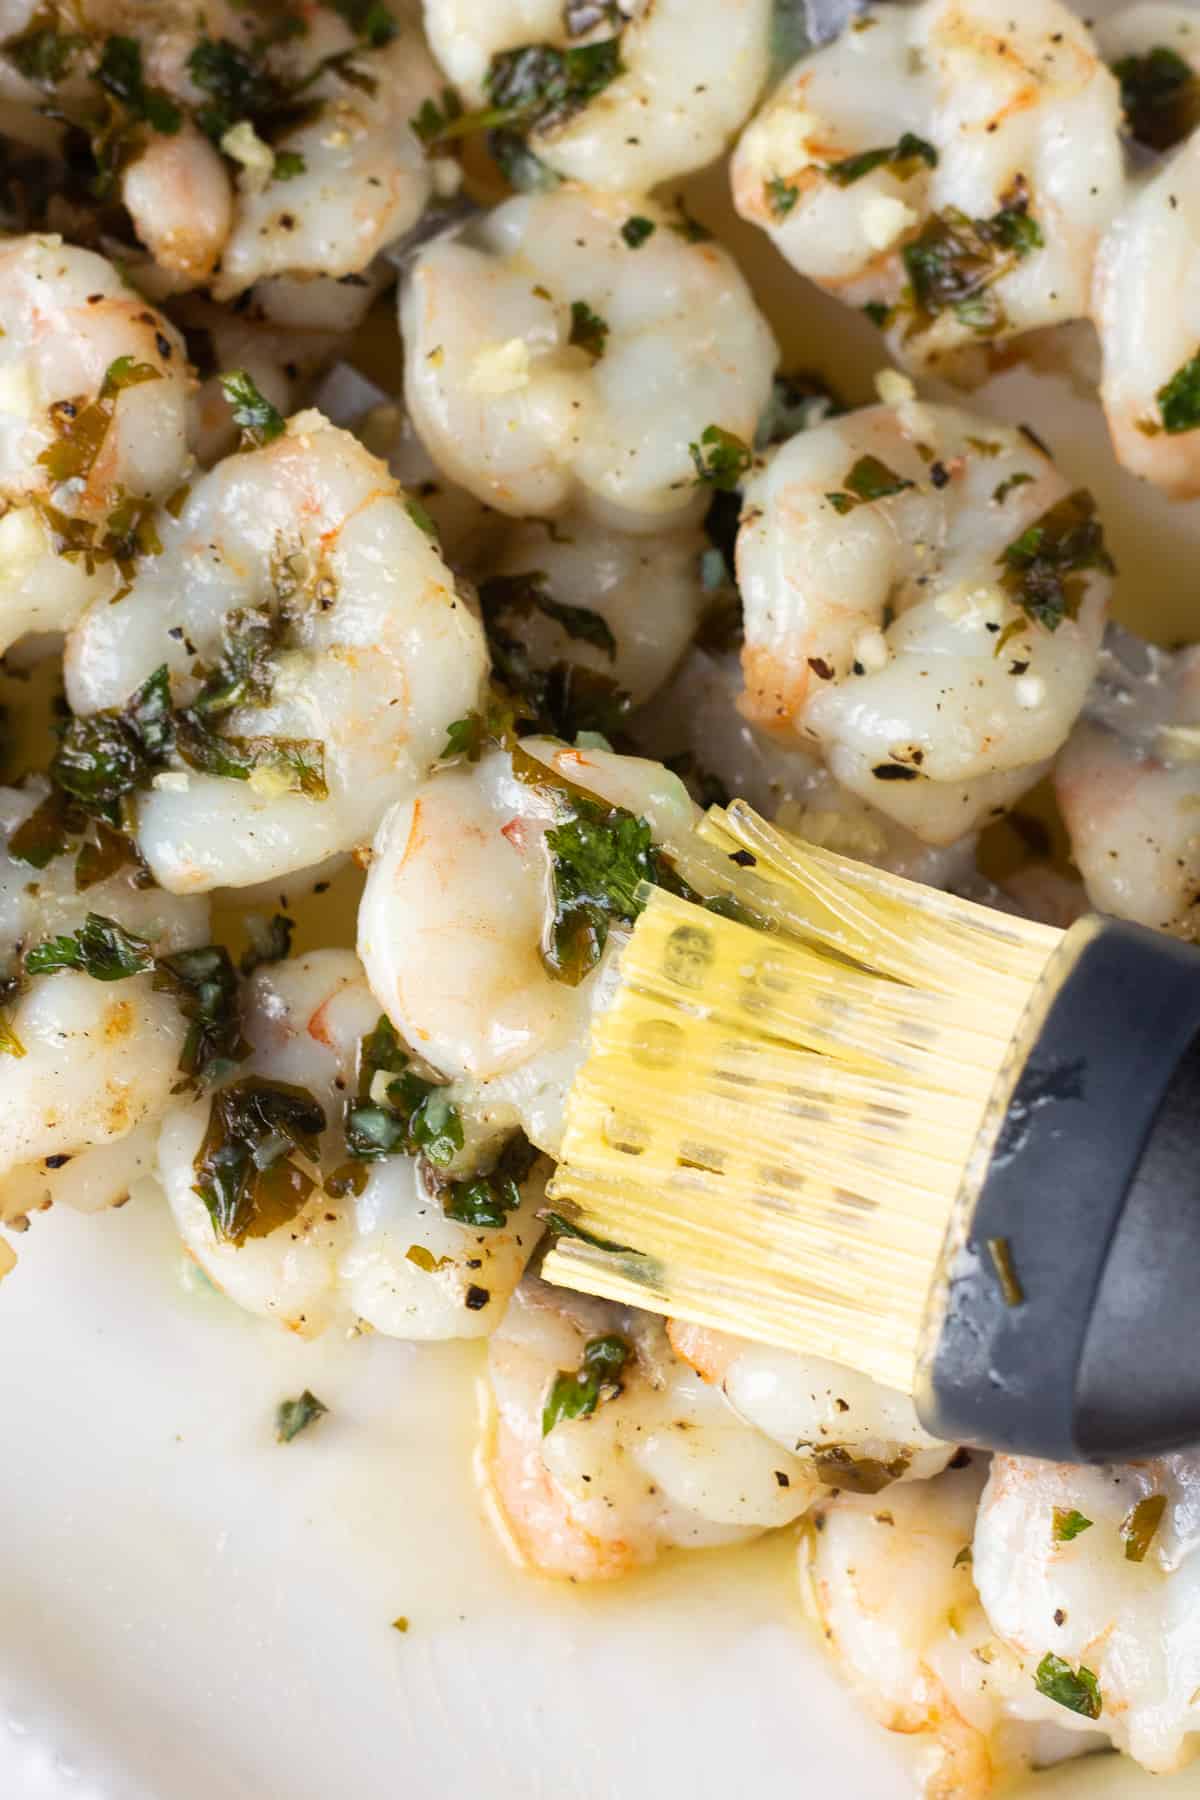 Garlic sauce being brushed onto shrimp skewers on a white platter by a silicone brush.